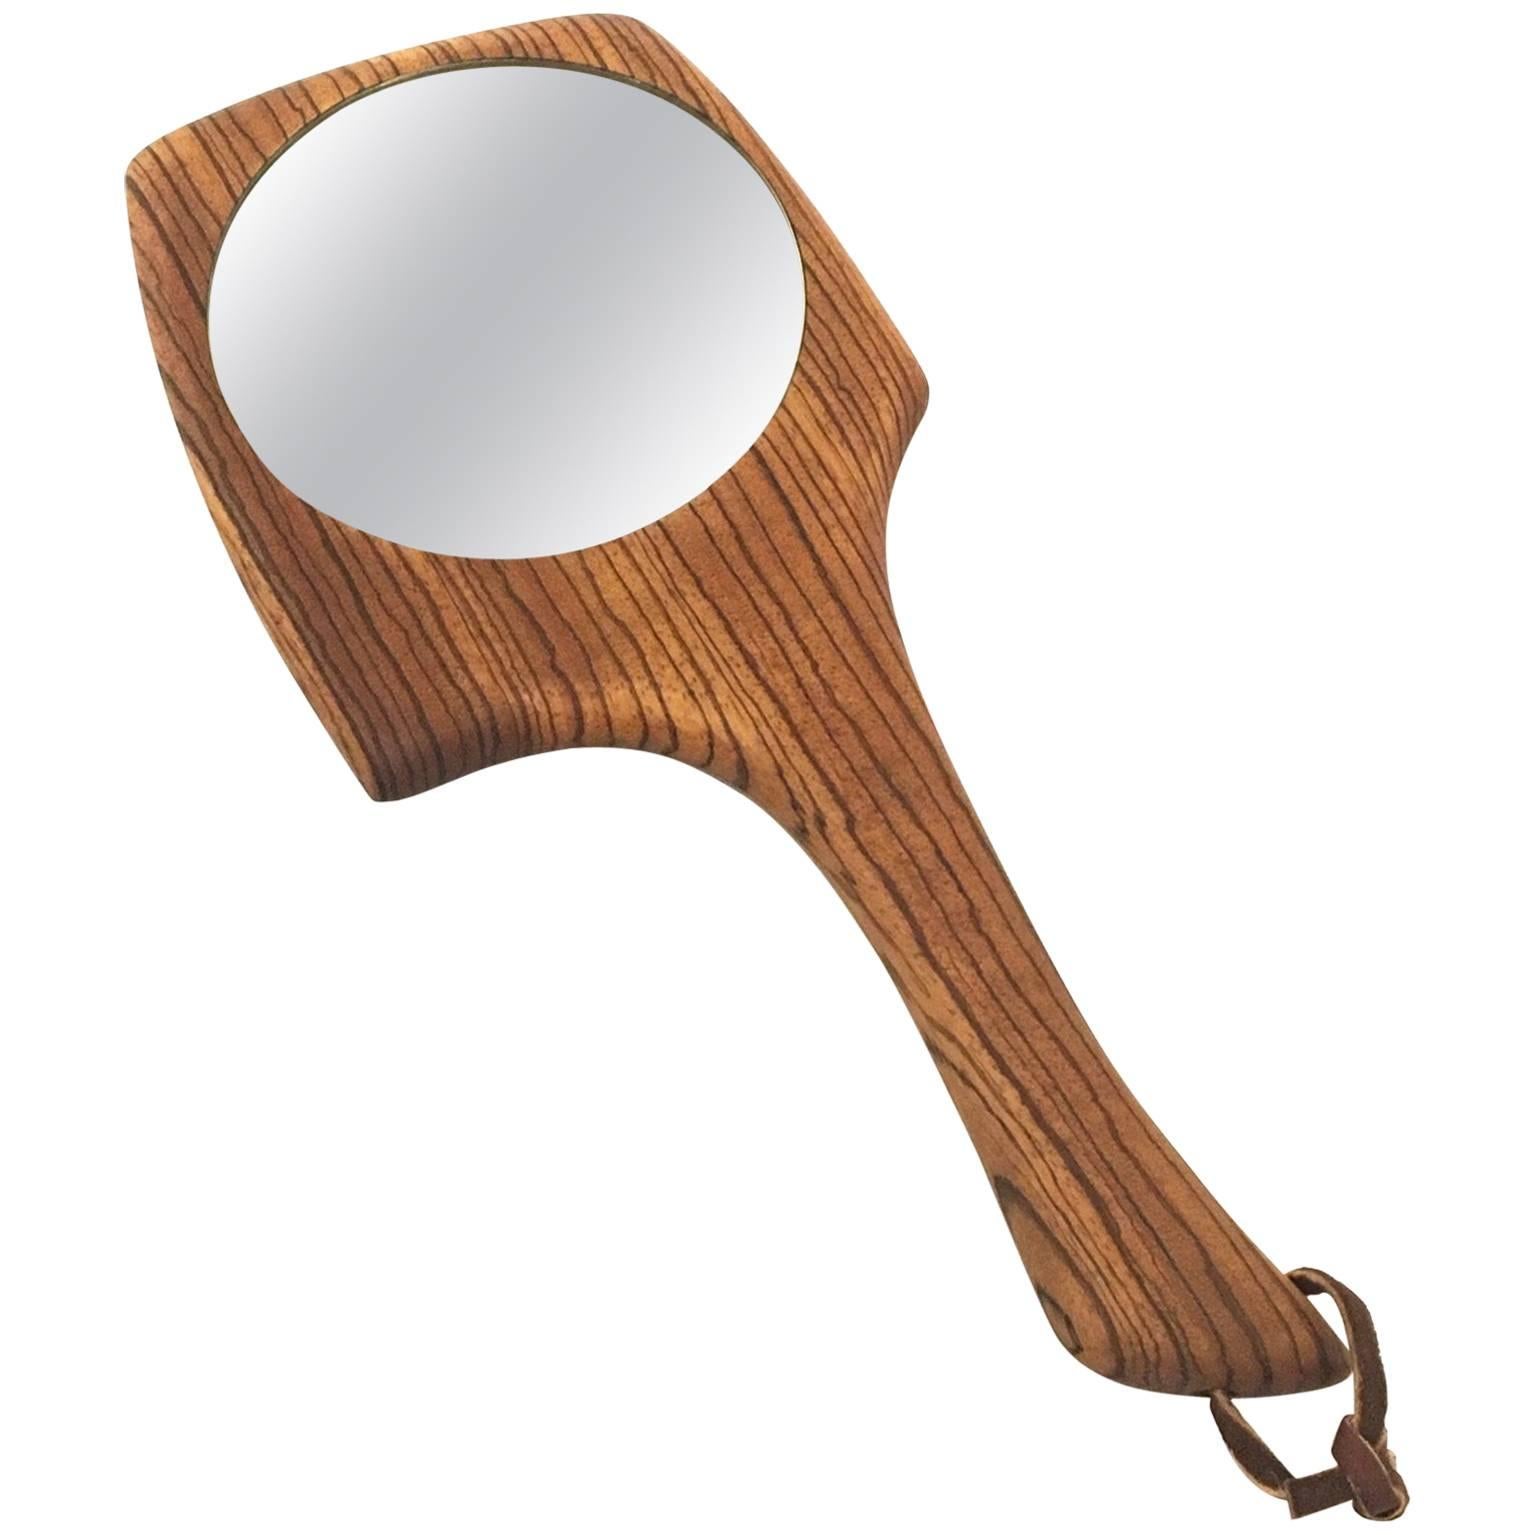 Exotic Wood California Design Free-Form Hand Mirror with Leather Strap